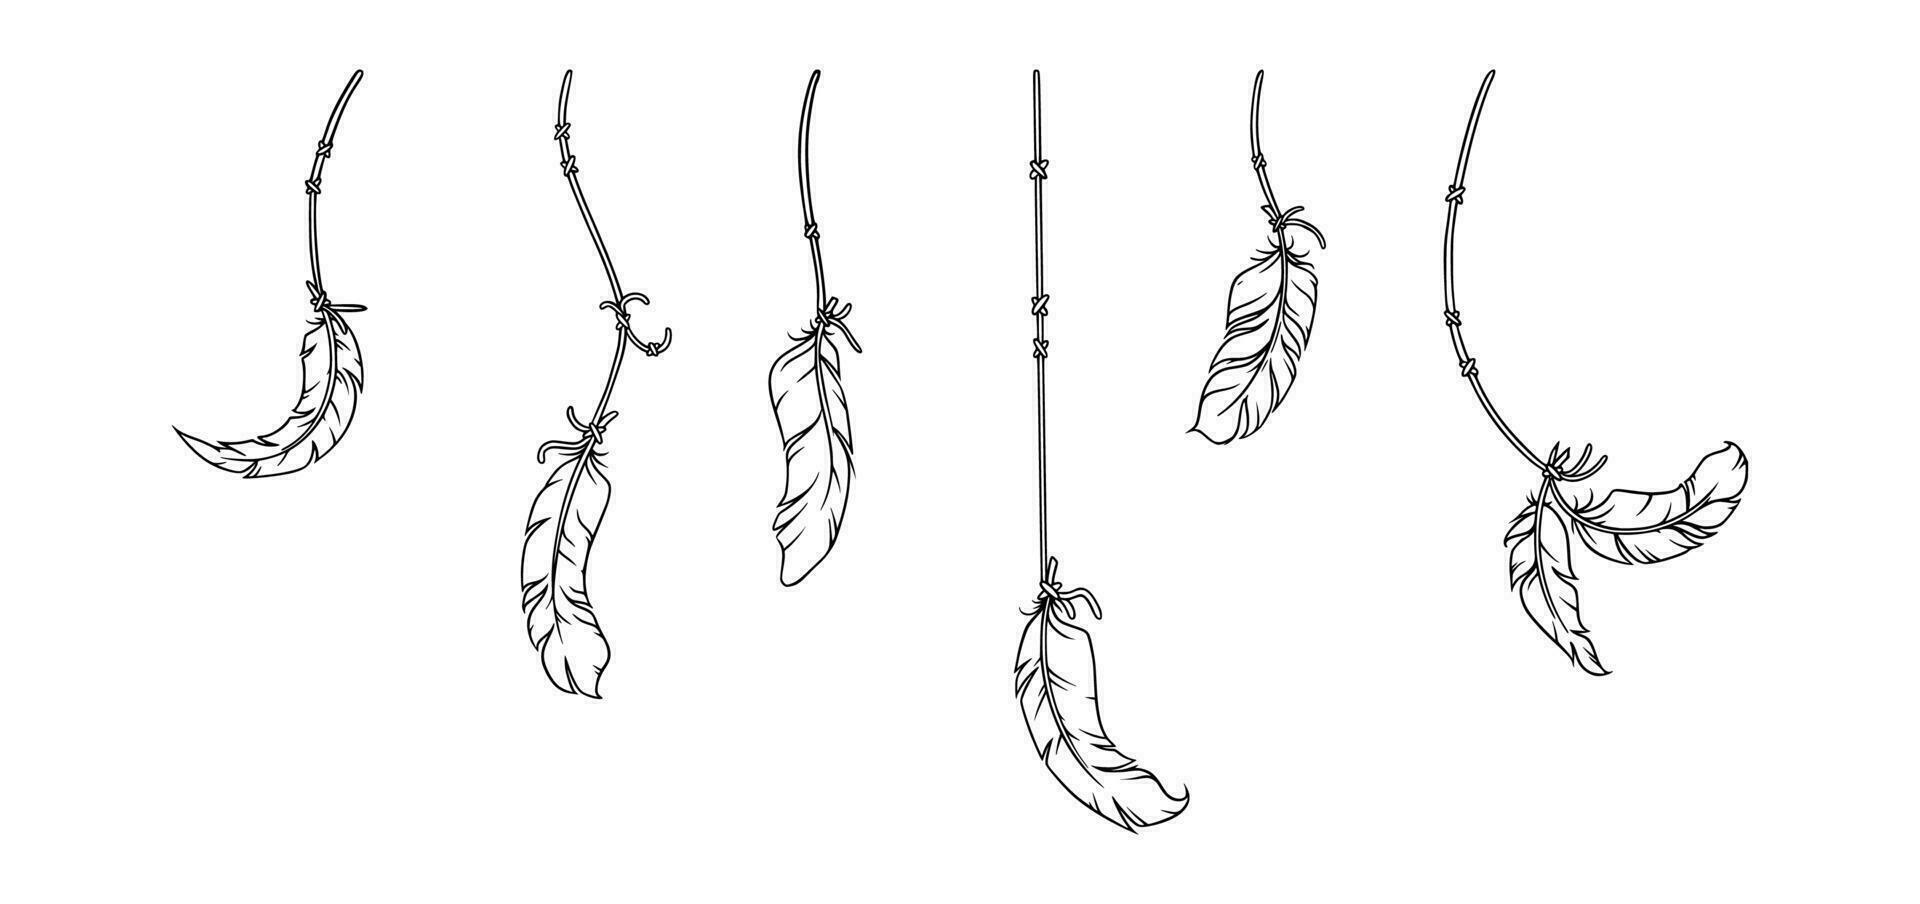 Dreamcatcher feather sketch. Native american decor with feathers and dream catchers. Vector illustration